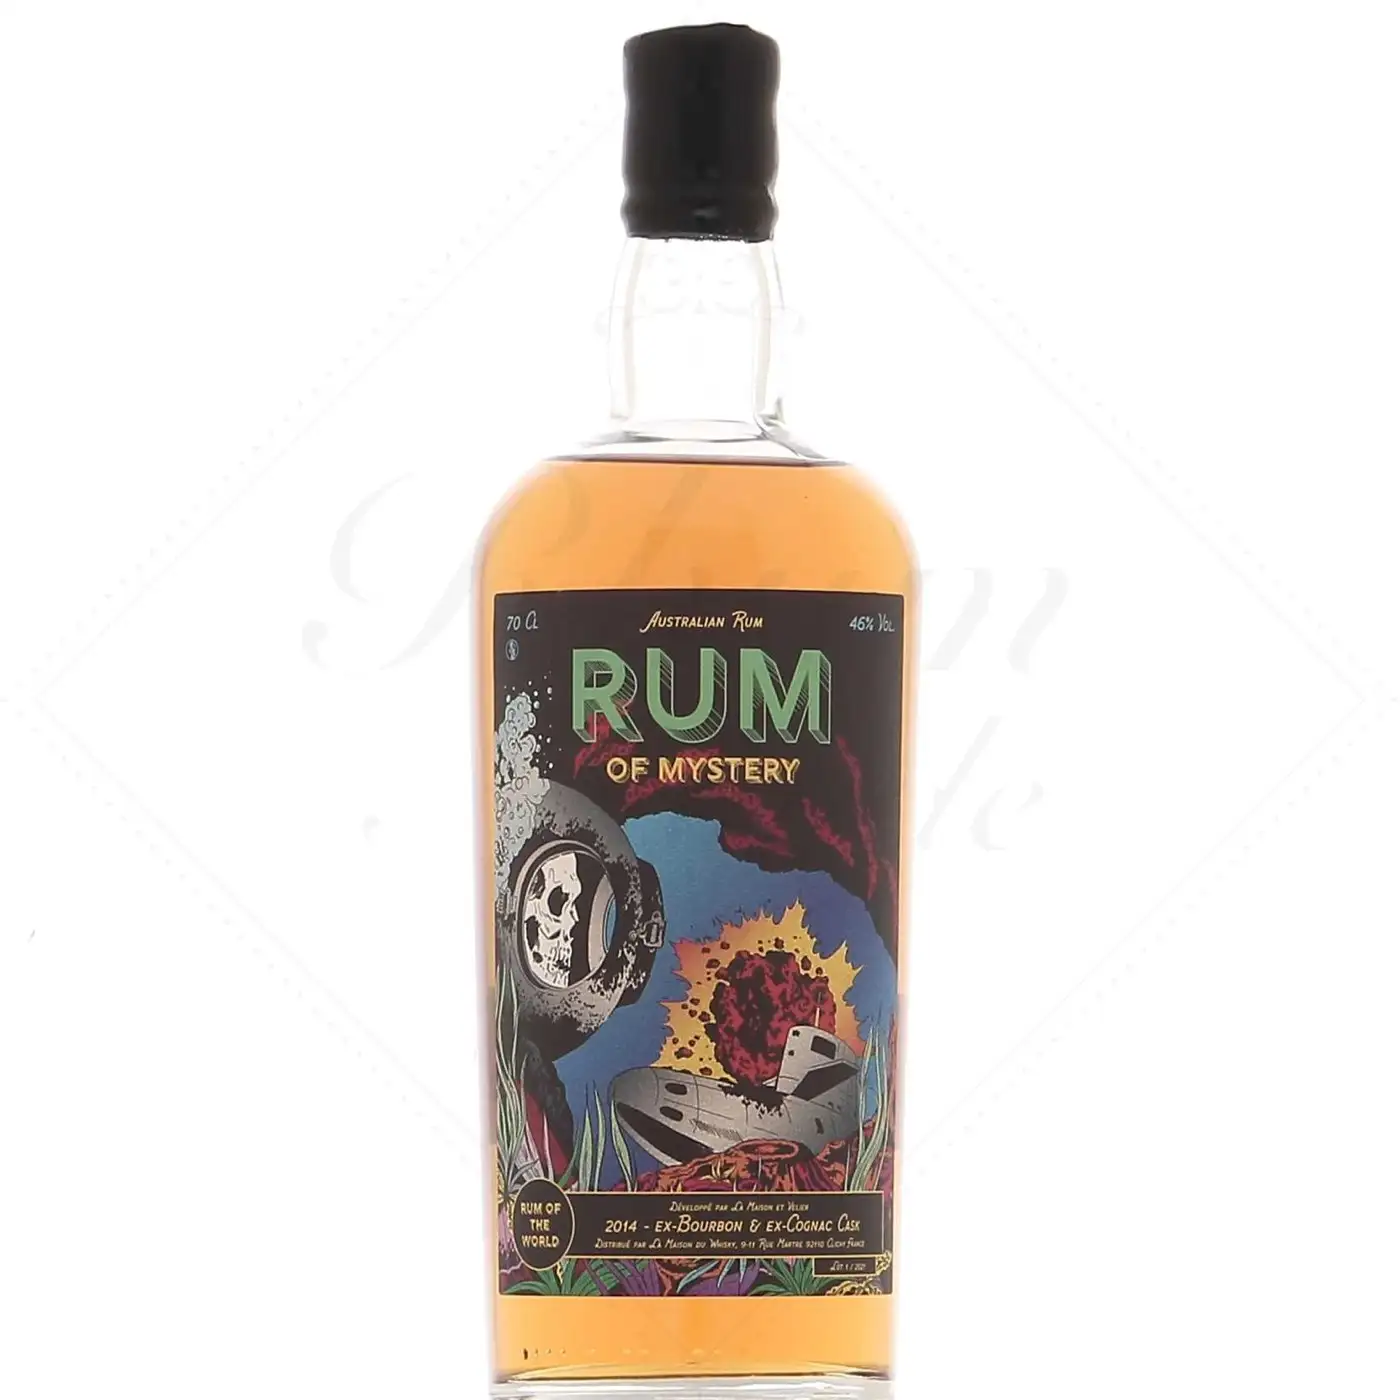 Image of the front of the bottle of the rum Rum of the World: Rum of Mystery